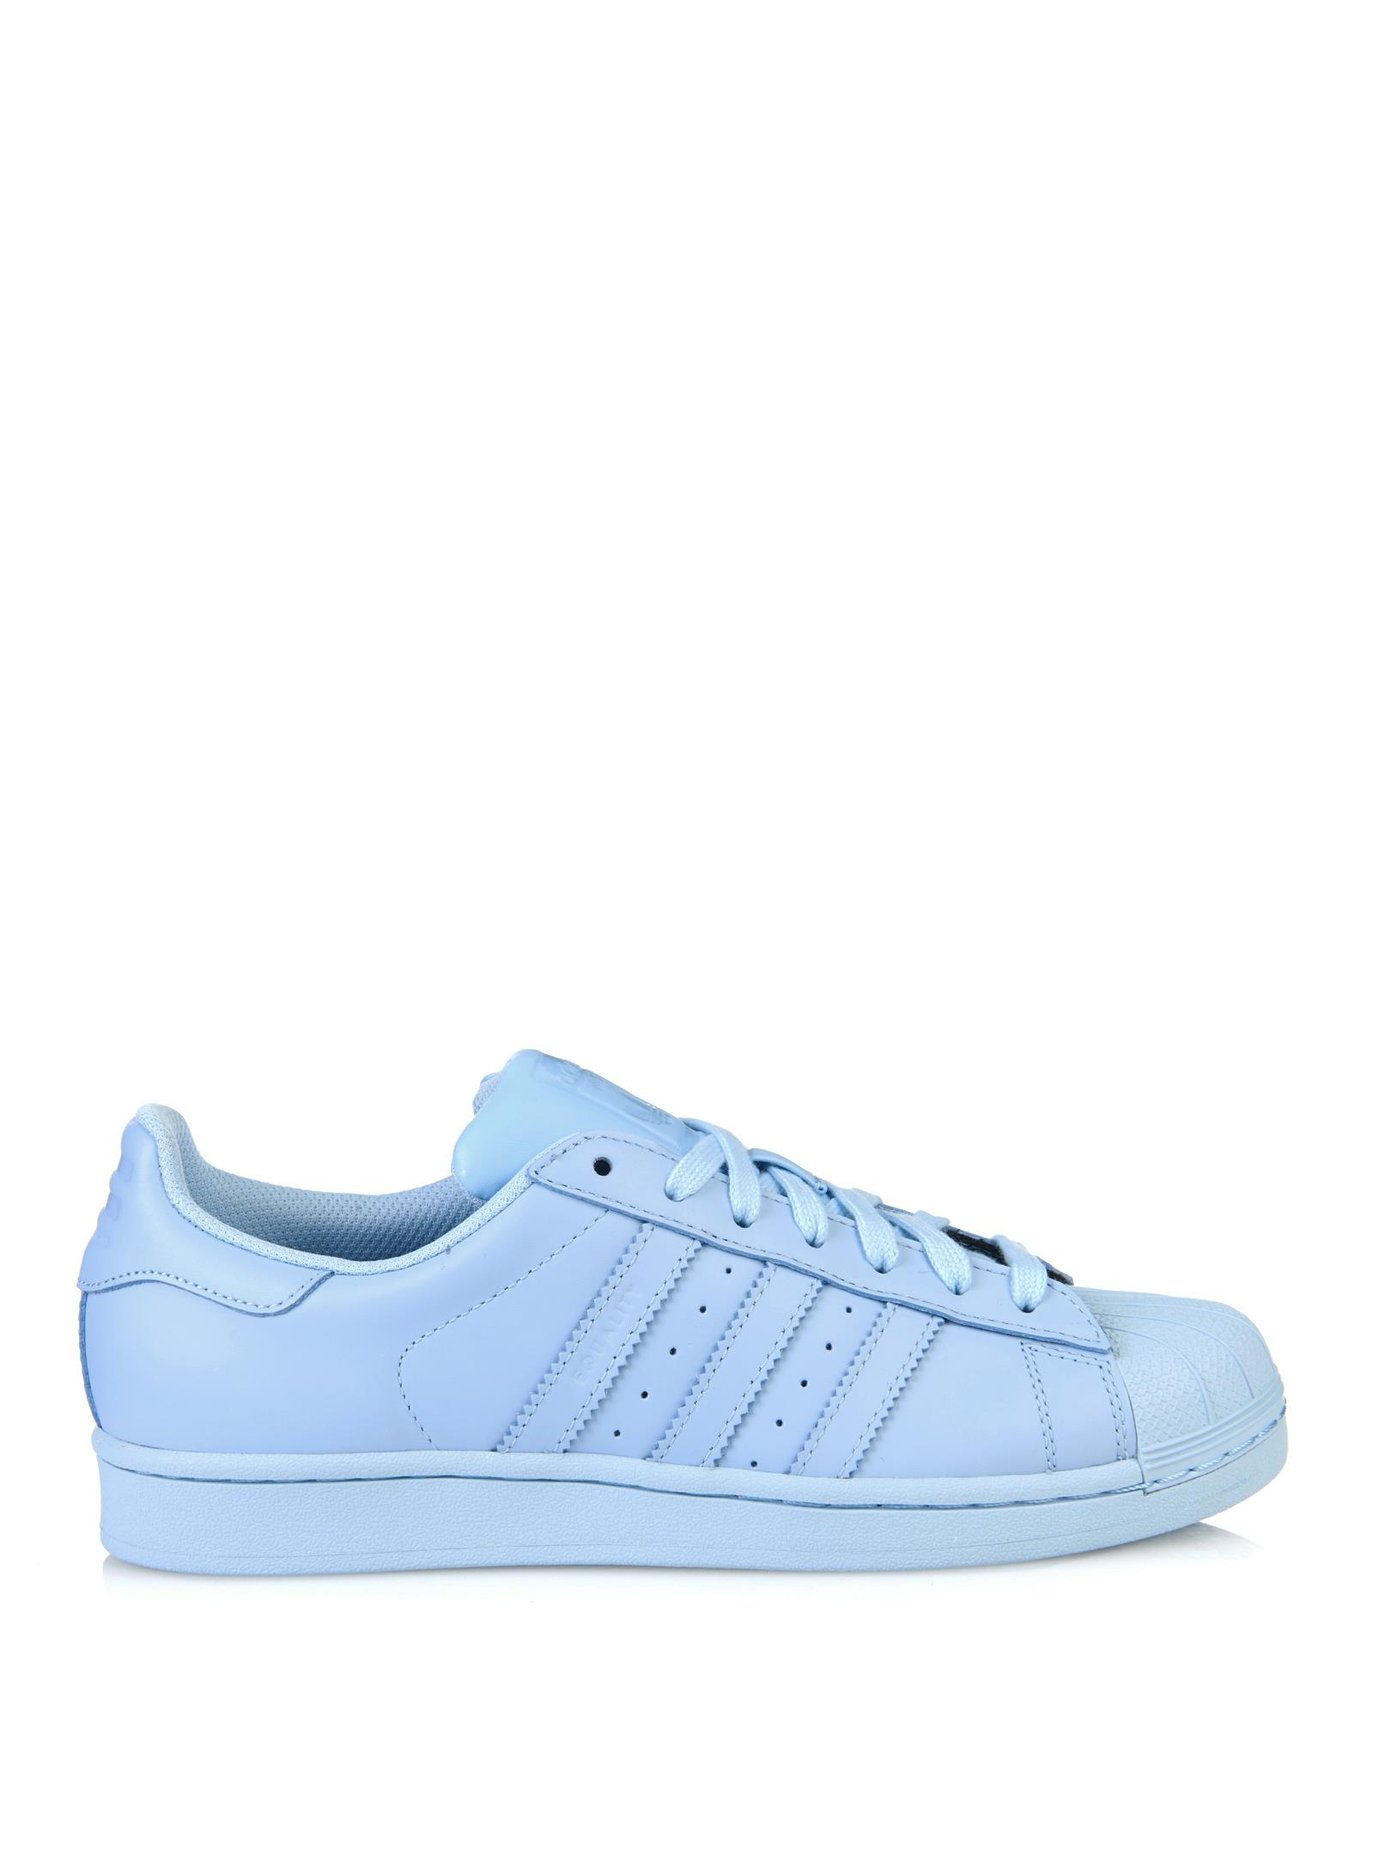 adidas blue leather trainers